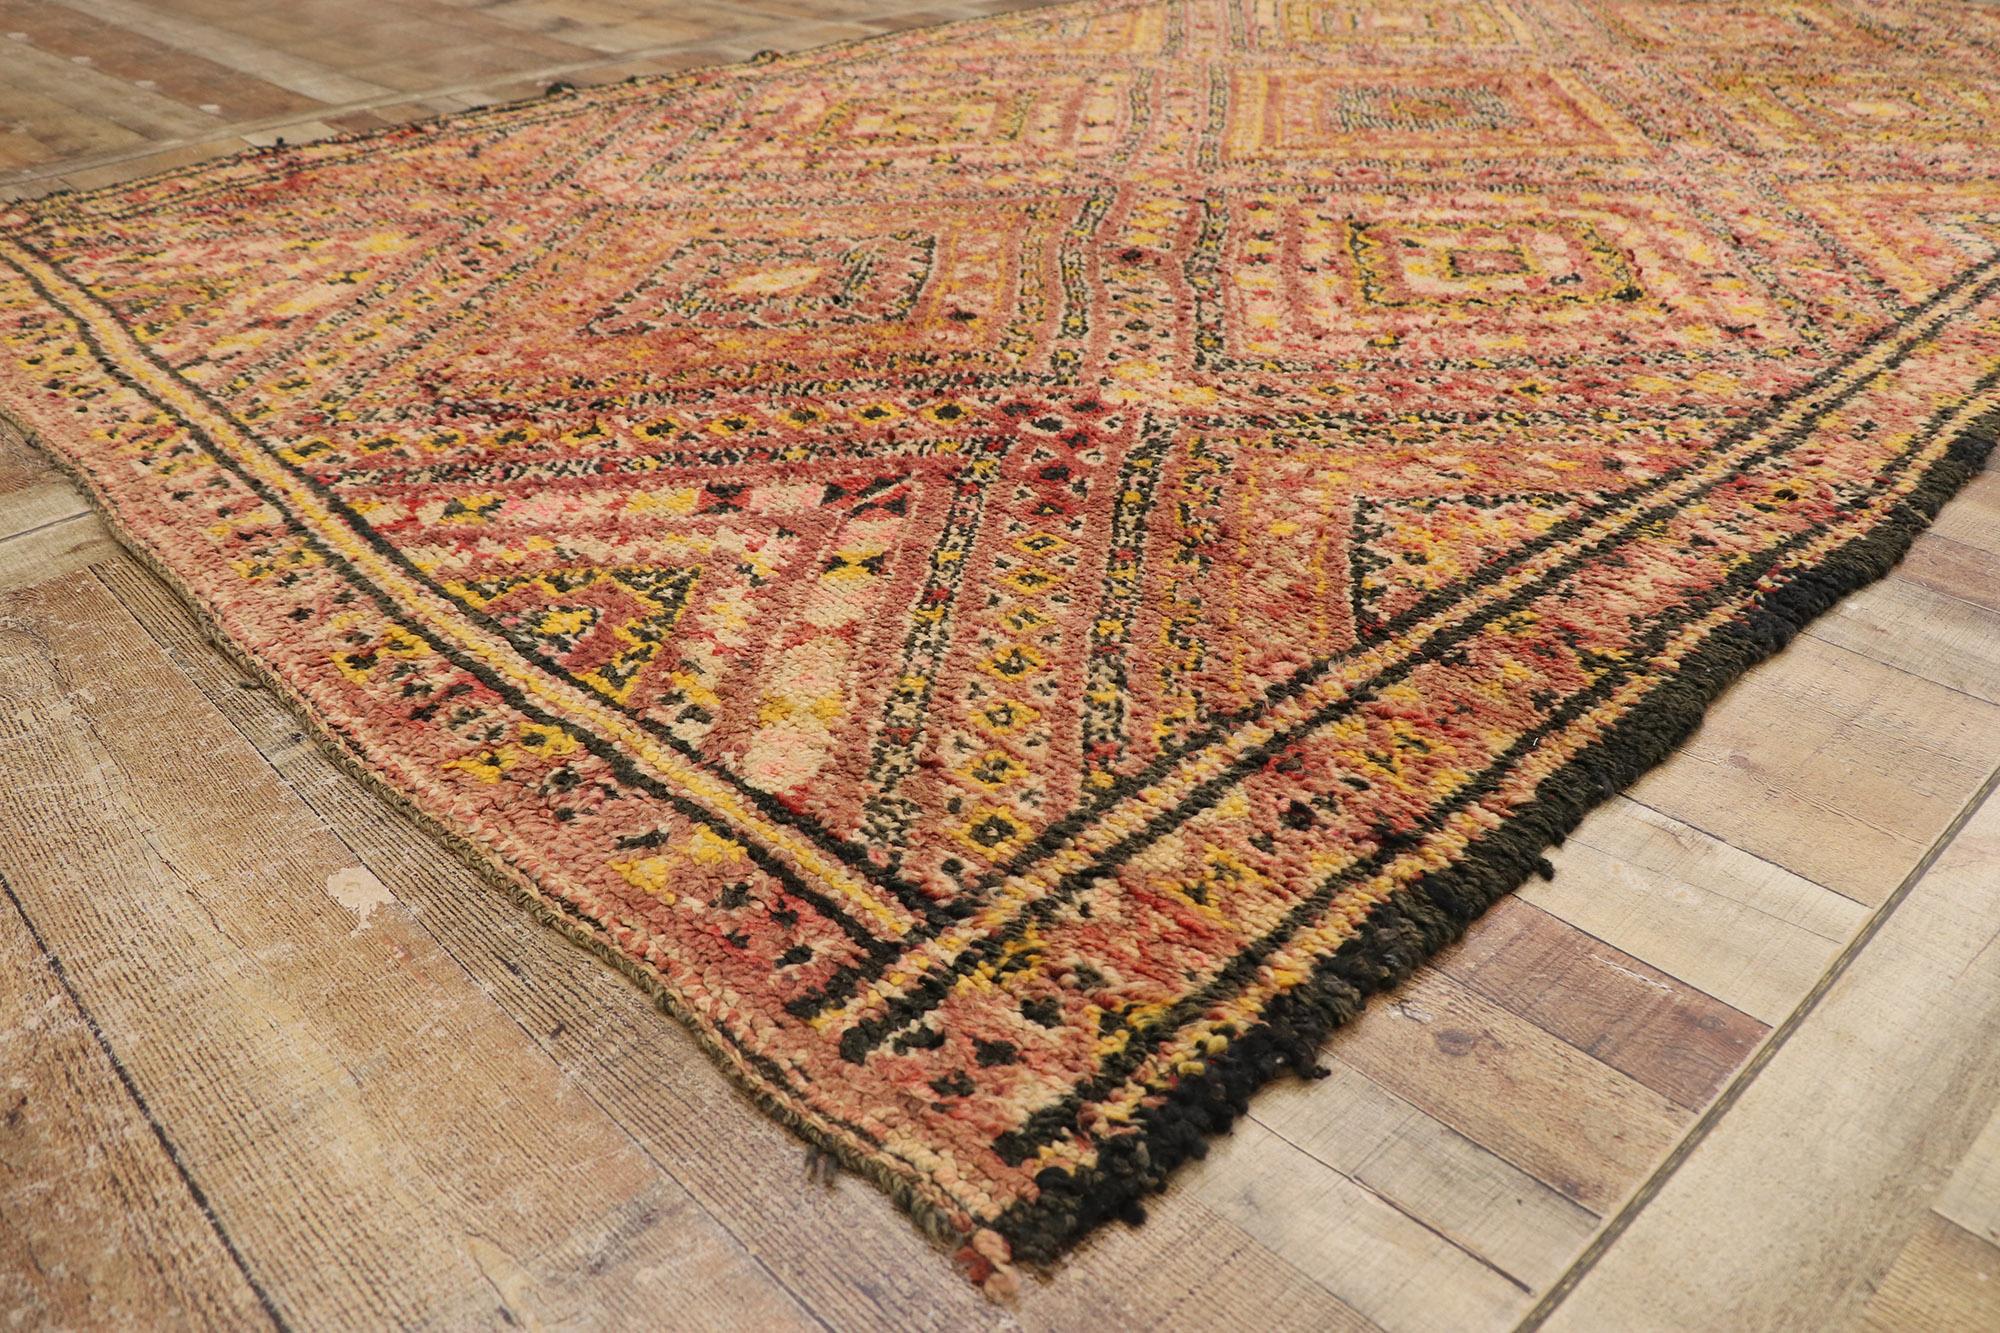 Wool Vintage Berber Beni M'Guild Moroccan Rug with Mid-Century Modern Style For Sale